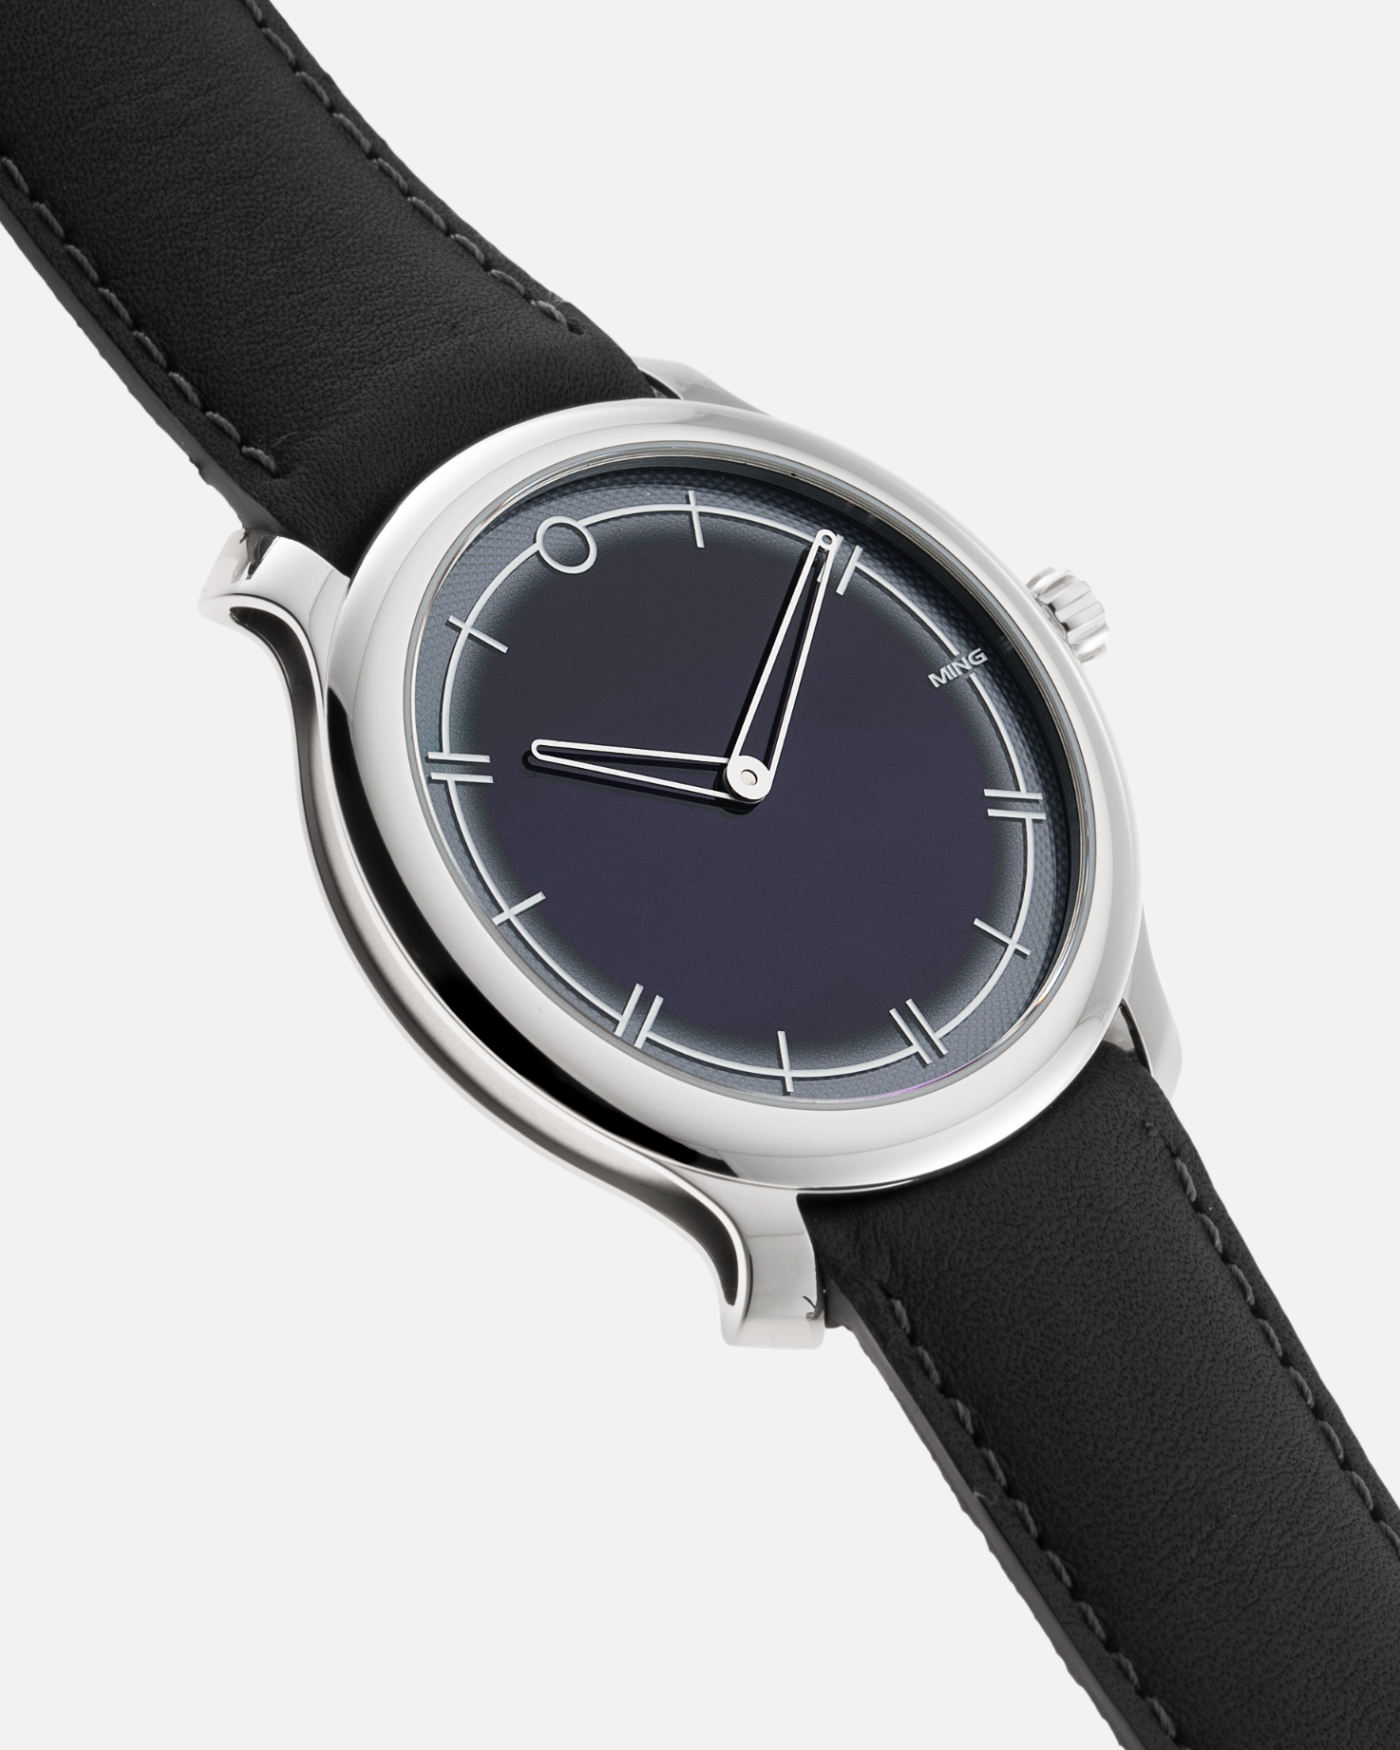 Brand: Ming Year: 2021 Model: 27.02 Material: Stainless Steel Movement: Heavily modified ETA Peseux 7001 Case Diameter: 38mm Strap: Jean Rousseau Blue Grey Leather for MING